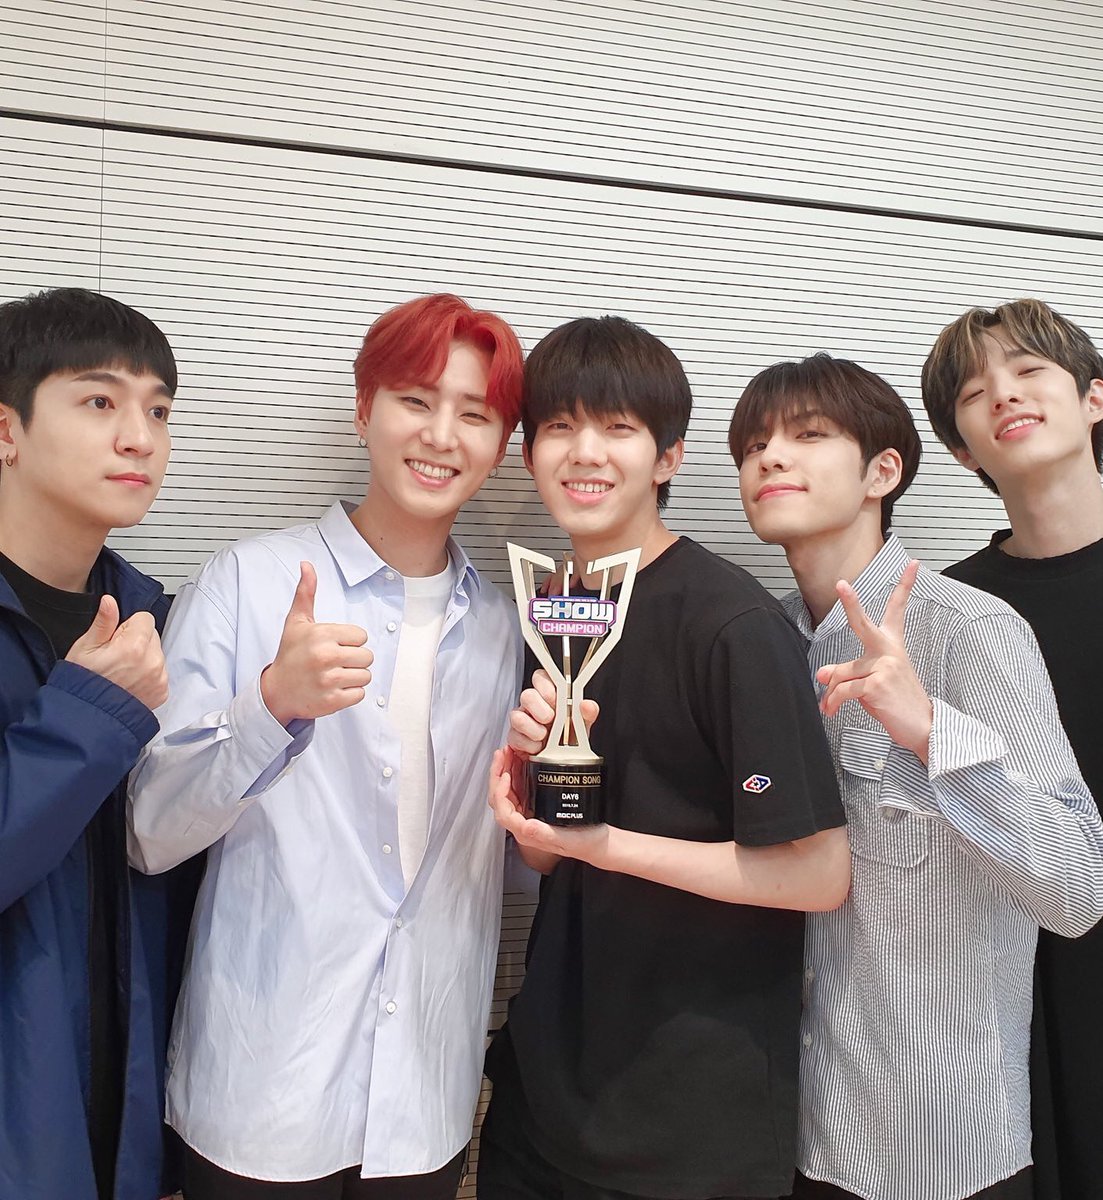 A thread of DAY6 being happy that their music and hard work are finally appreciated by receiving these achievements.  #DAY6     #데이식스     #The_Book_of_Us     #The_Demon    #Day6_Zombie  